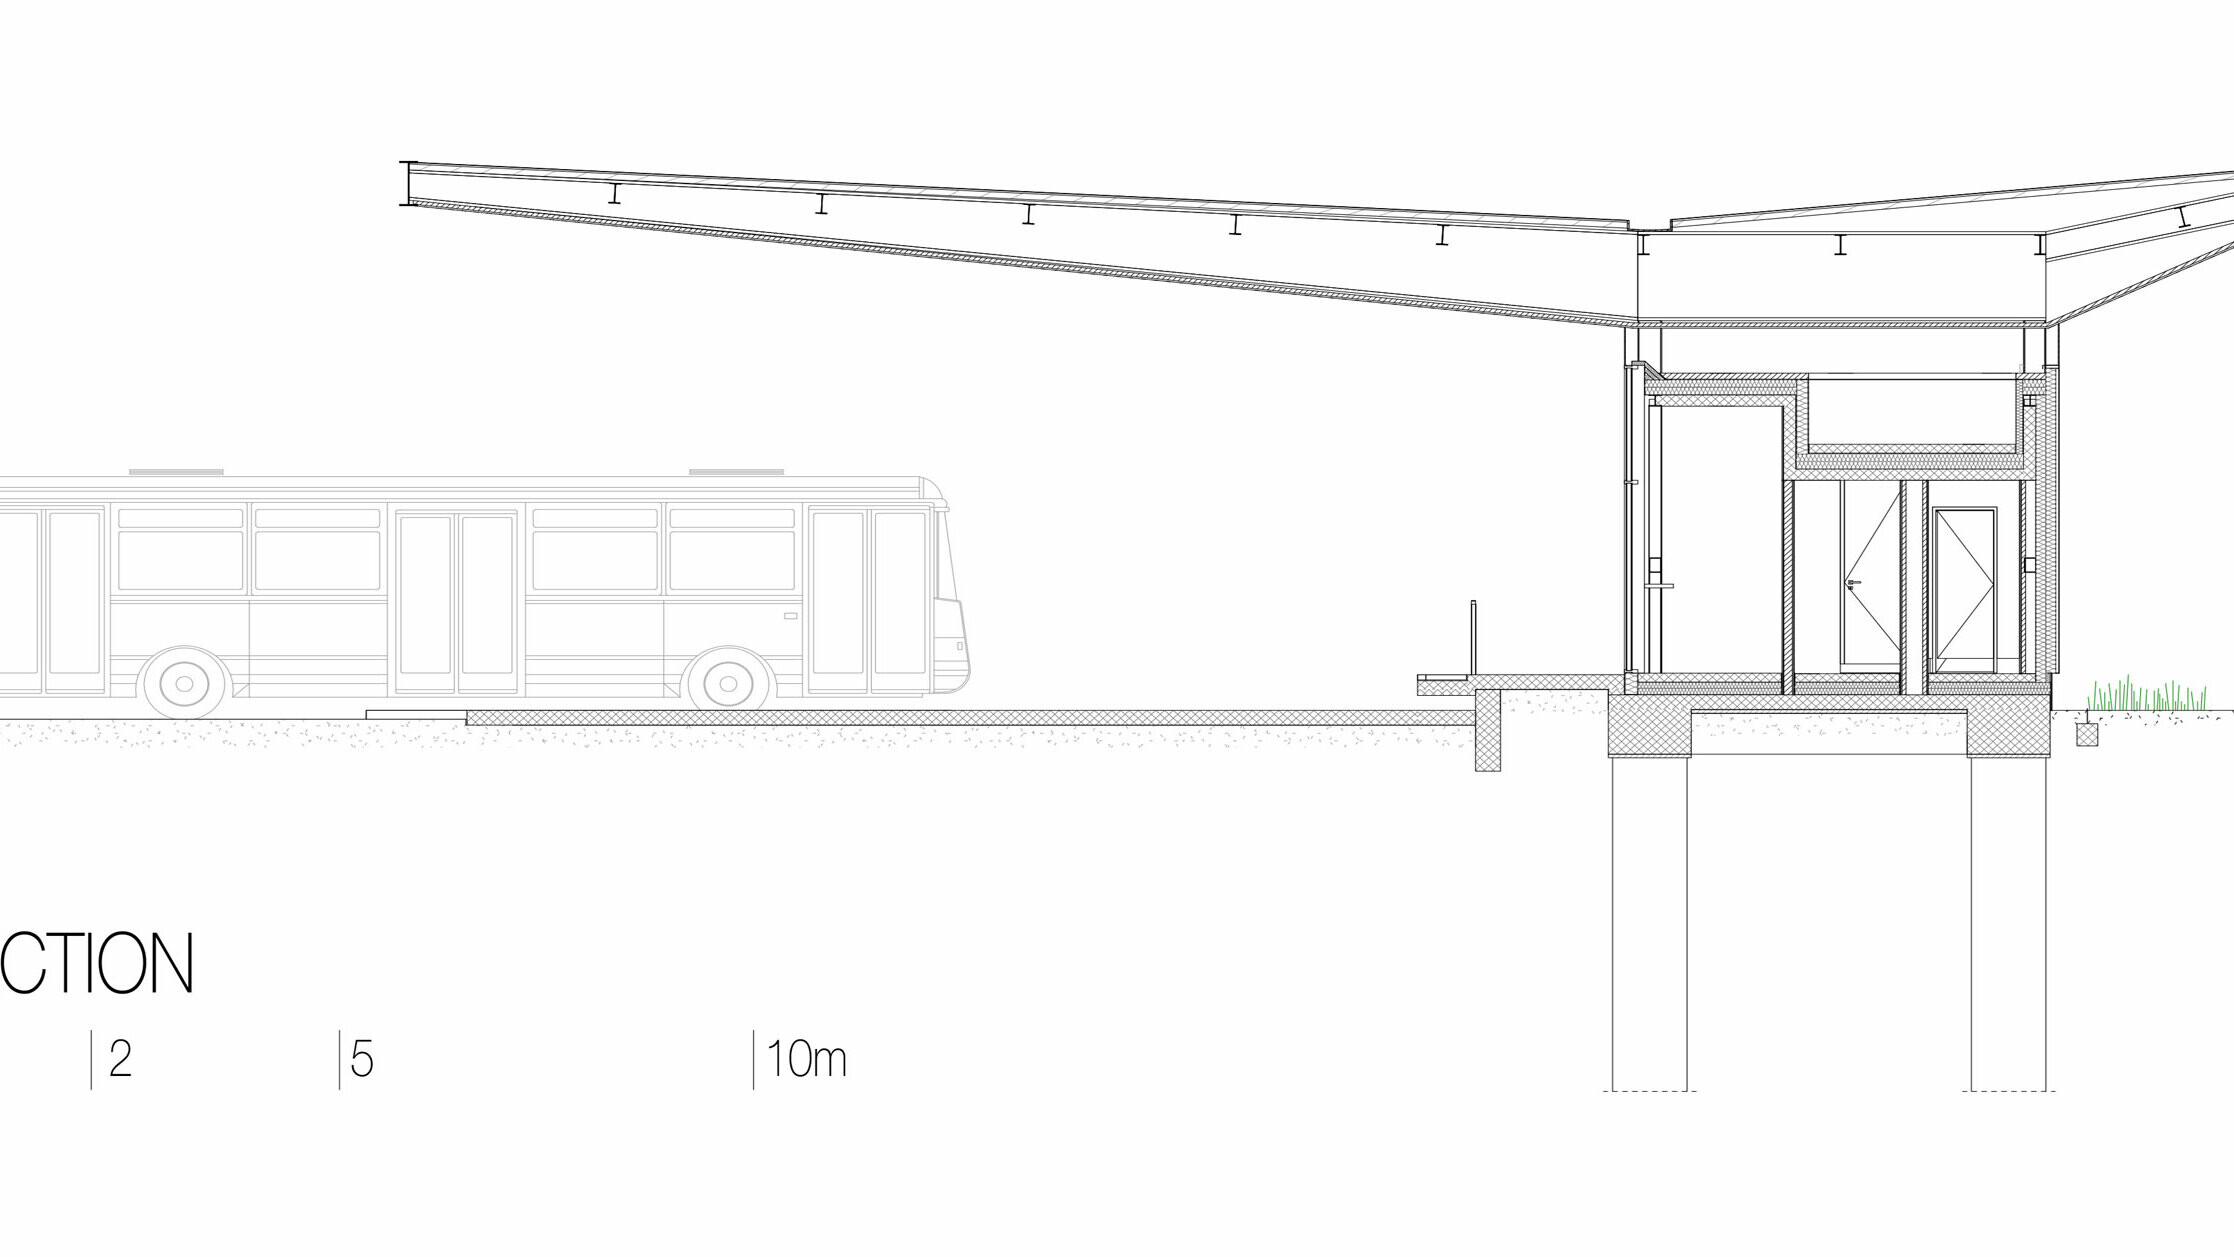 The drawing shows a cross-section of the "Autobusni Kolodvor Slavonski Brod" bus station in Croatia. The section illustrates the construction of the building, including the white PREFA Prefalz roof, which rests on slender pillars and protrudes far above the areas below. Beneath the roof are the station's interior spaces with clear lines and large glass surfaces. The drawing also shows the foundation construction and the underground columns that support the structure. A bus is shown on the left-hand side to illustrate the proportions. The cross-section emphasises the modern and functional construction of the bus stop and the integration of glass and aluminium into the design.